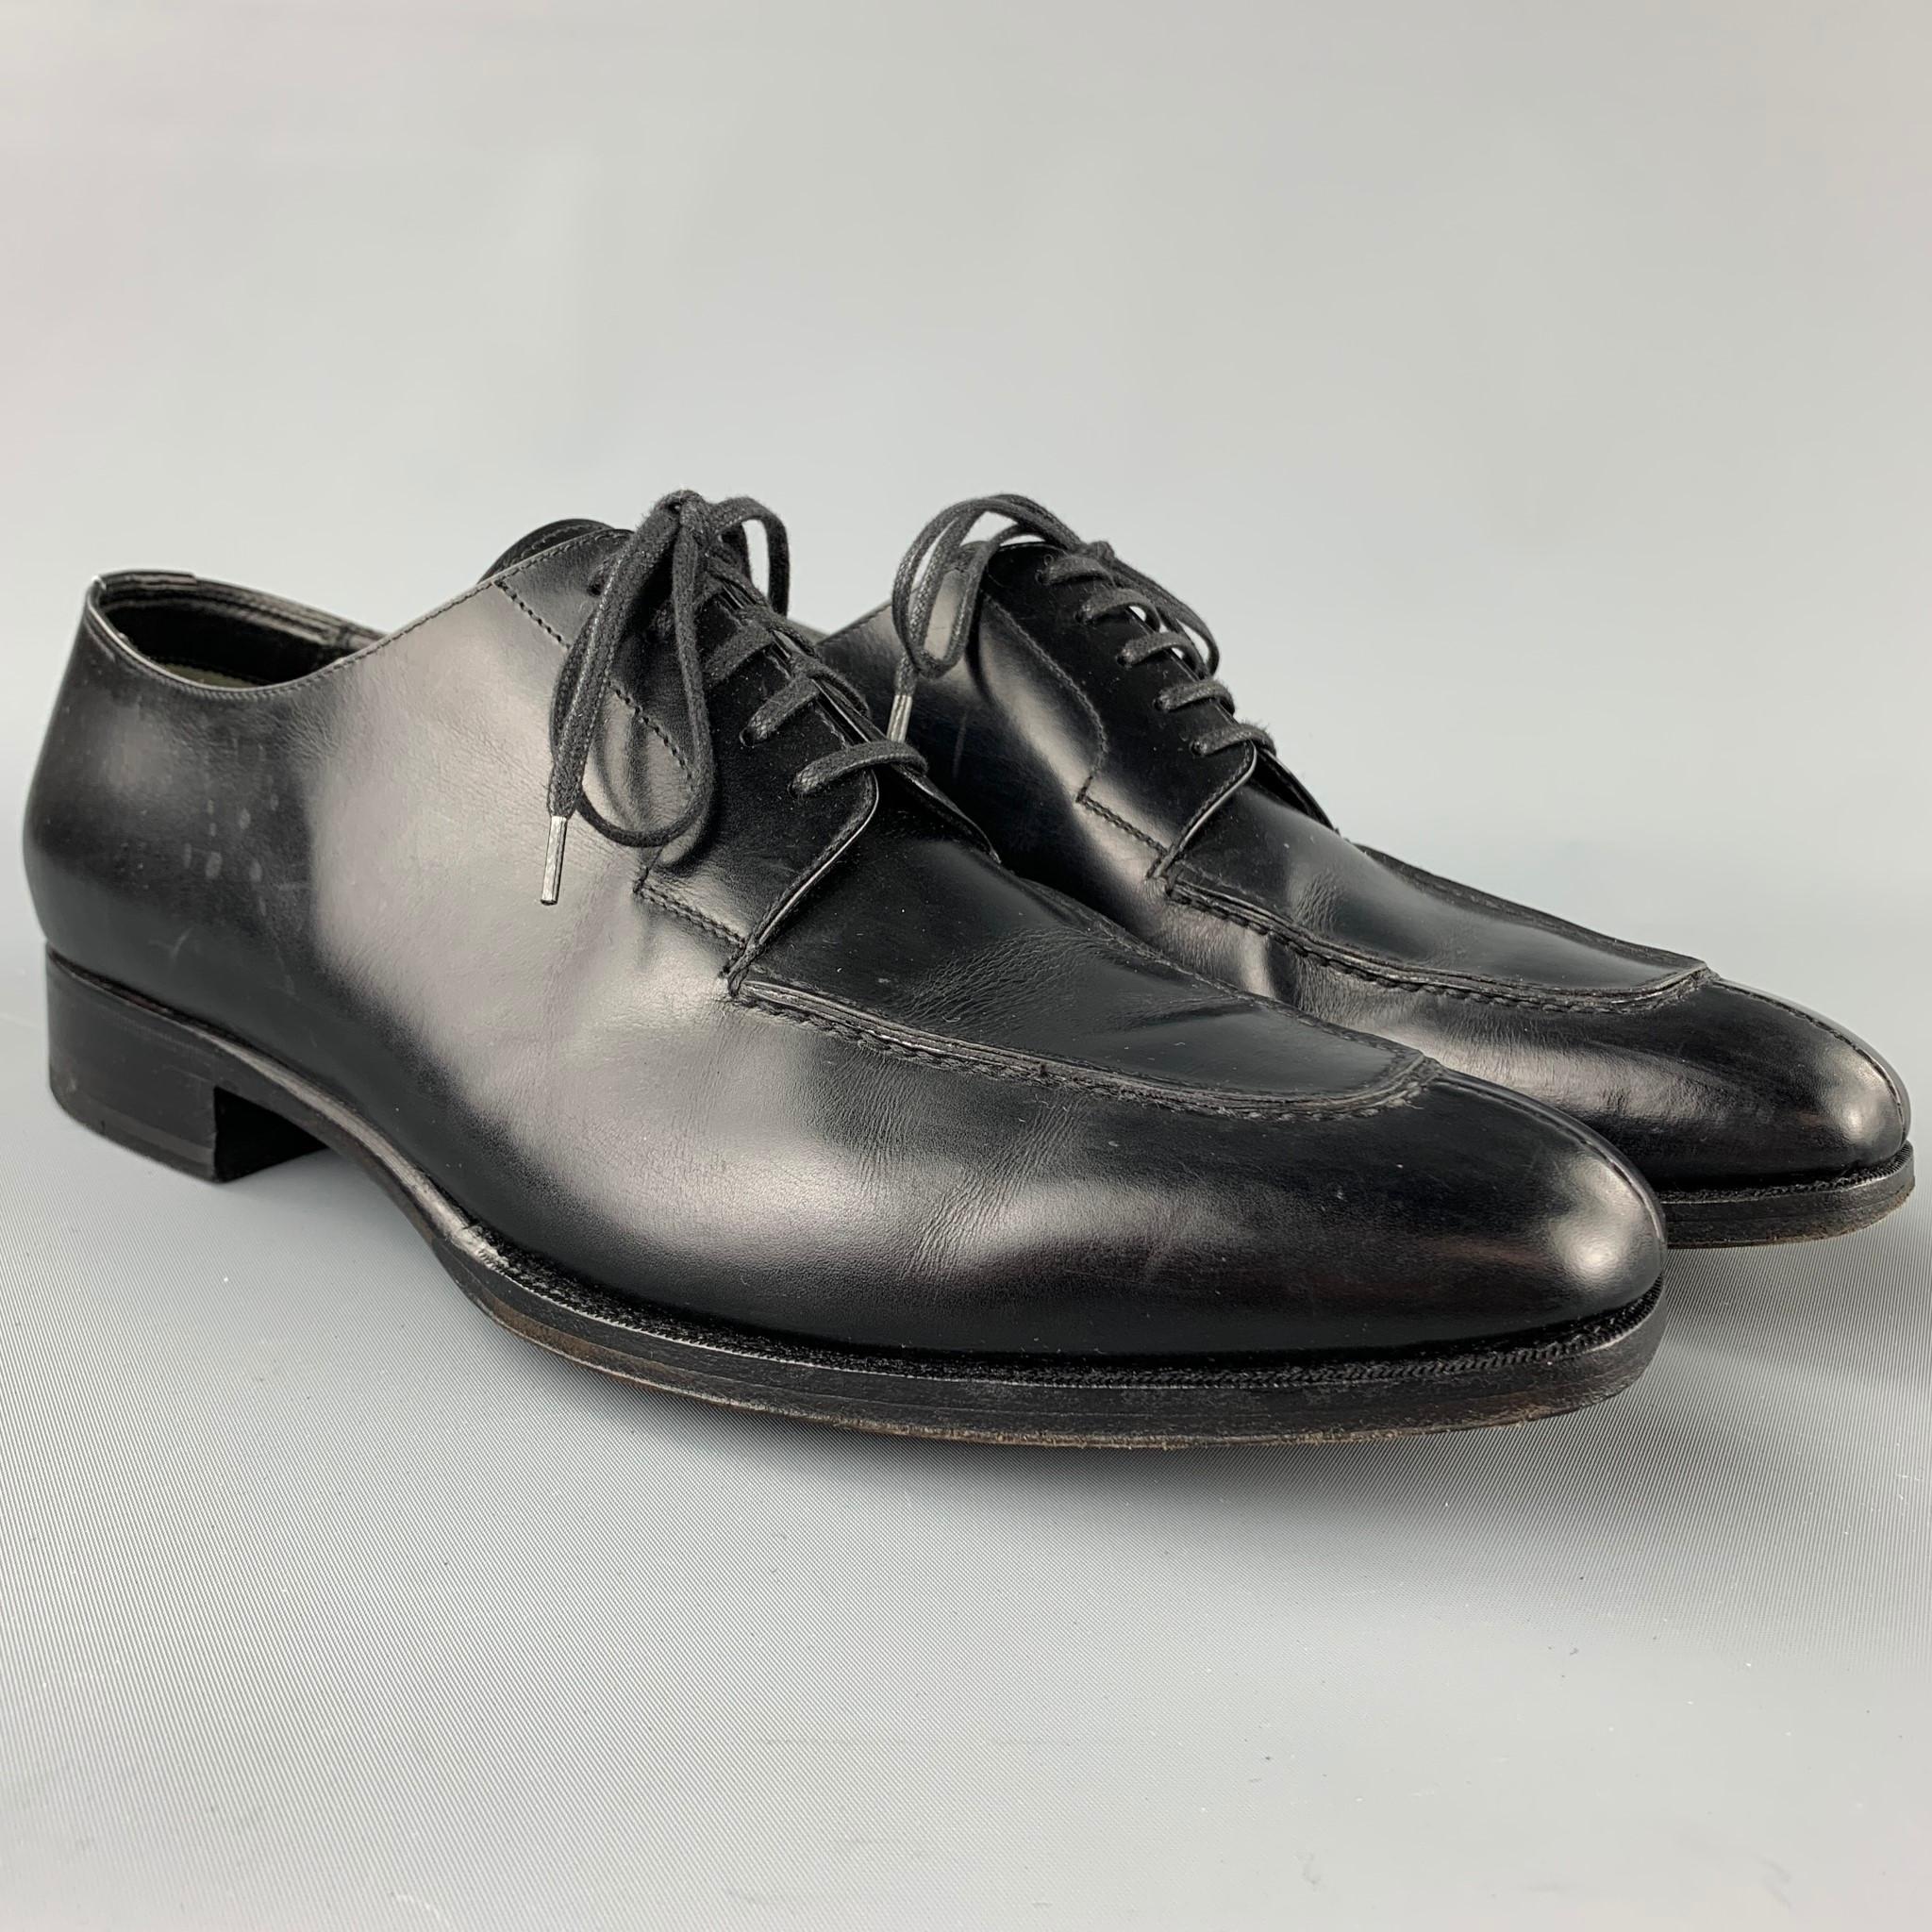 TOM FORD dress shoes comes in a black leather featuring a split toe blucher style, wooden sole, and a lace up closure. Made in Italy.

Very Good Pre-Owned Condition.
Marked: 11

Measurements:

12 in. x 4 in. 